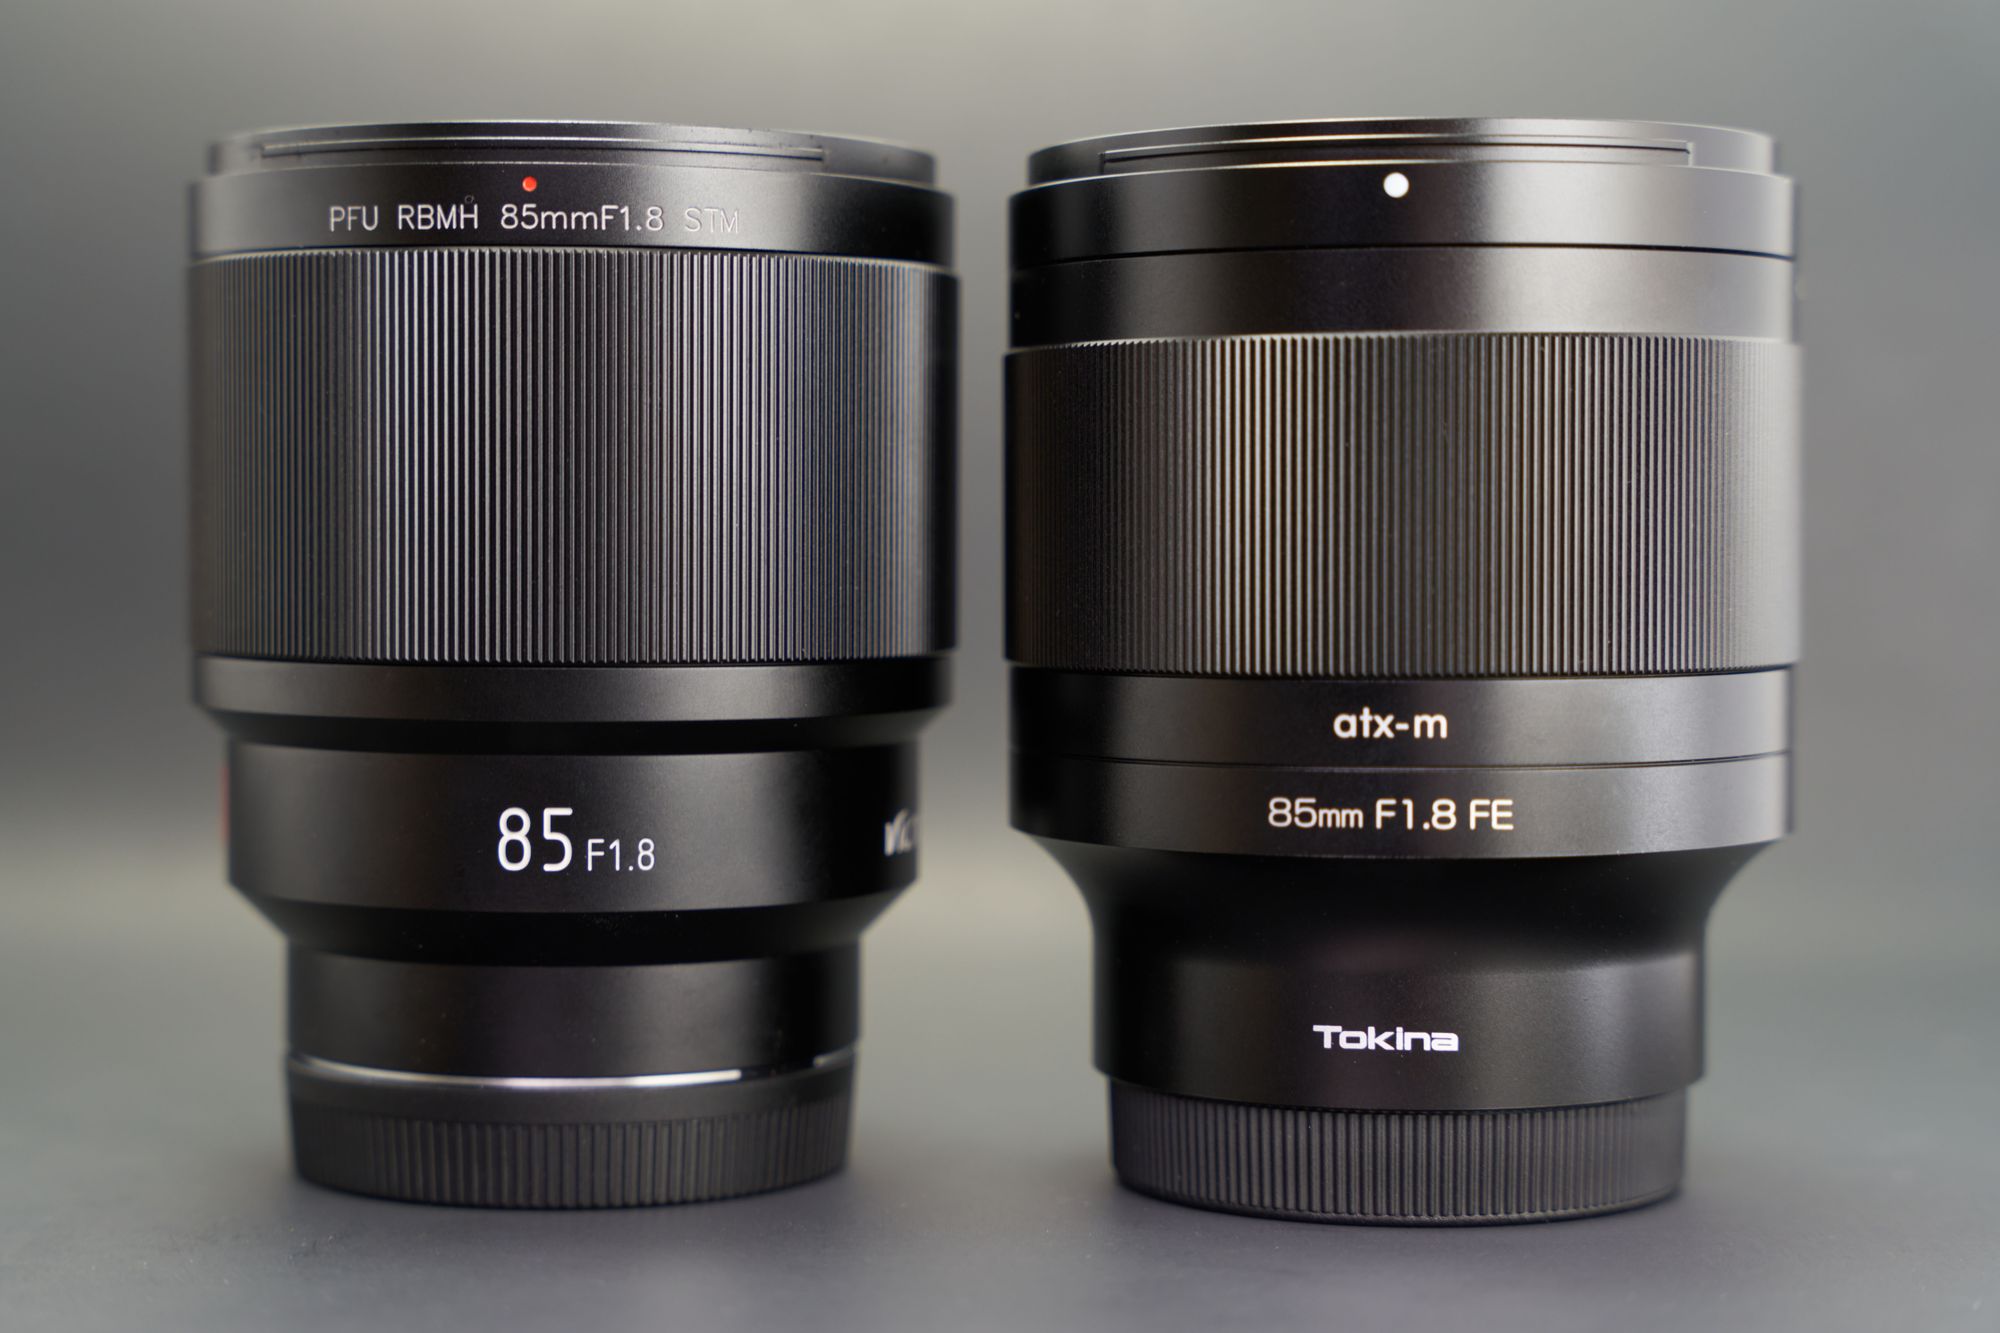 A side by side image of the Viltrox 85mm f1.8 STM (left) and Tokina ATX-M 85mm f1.8 (right)